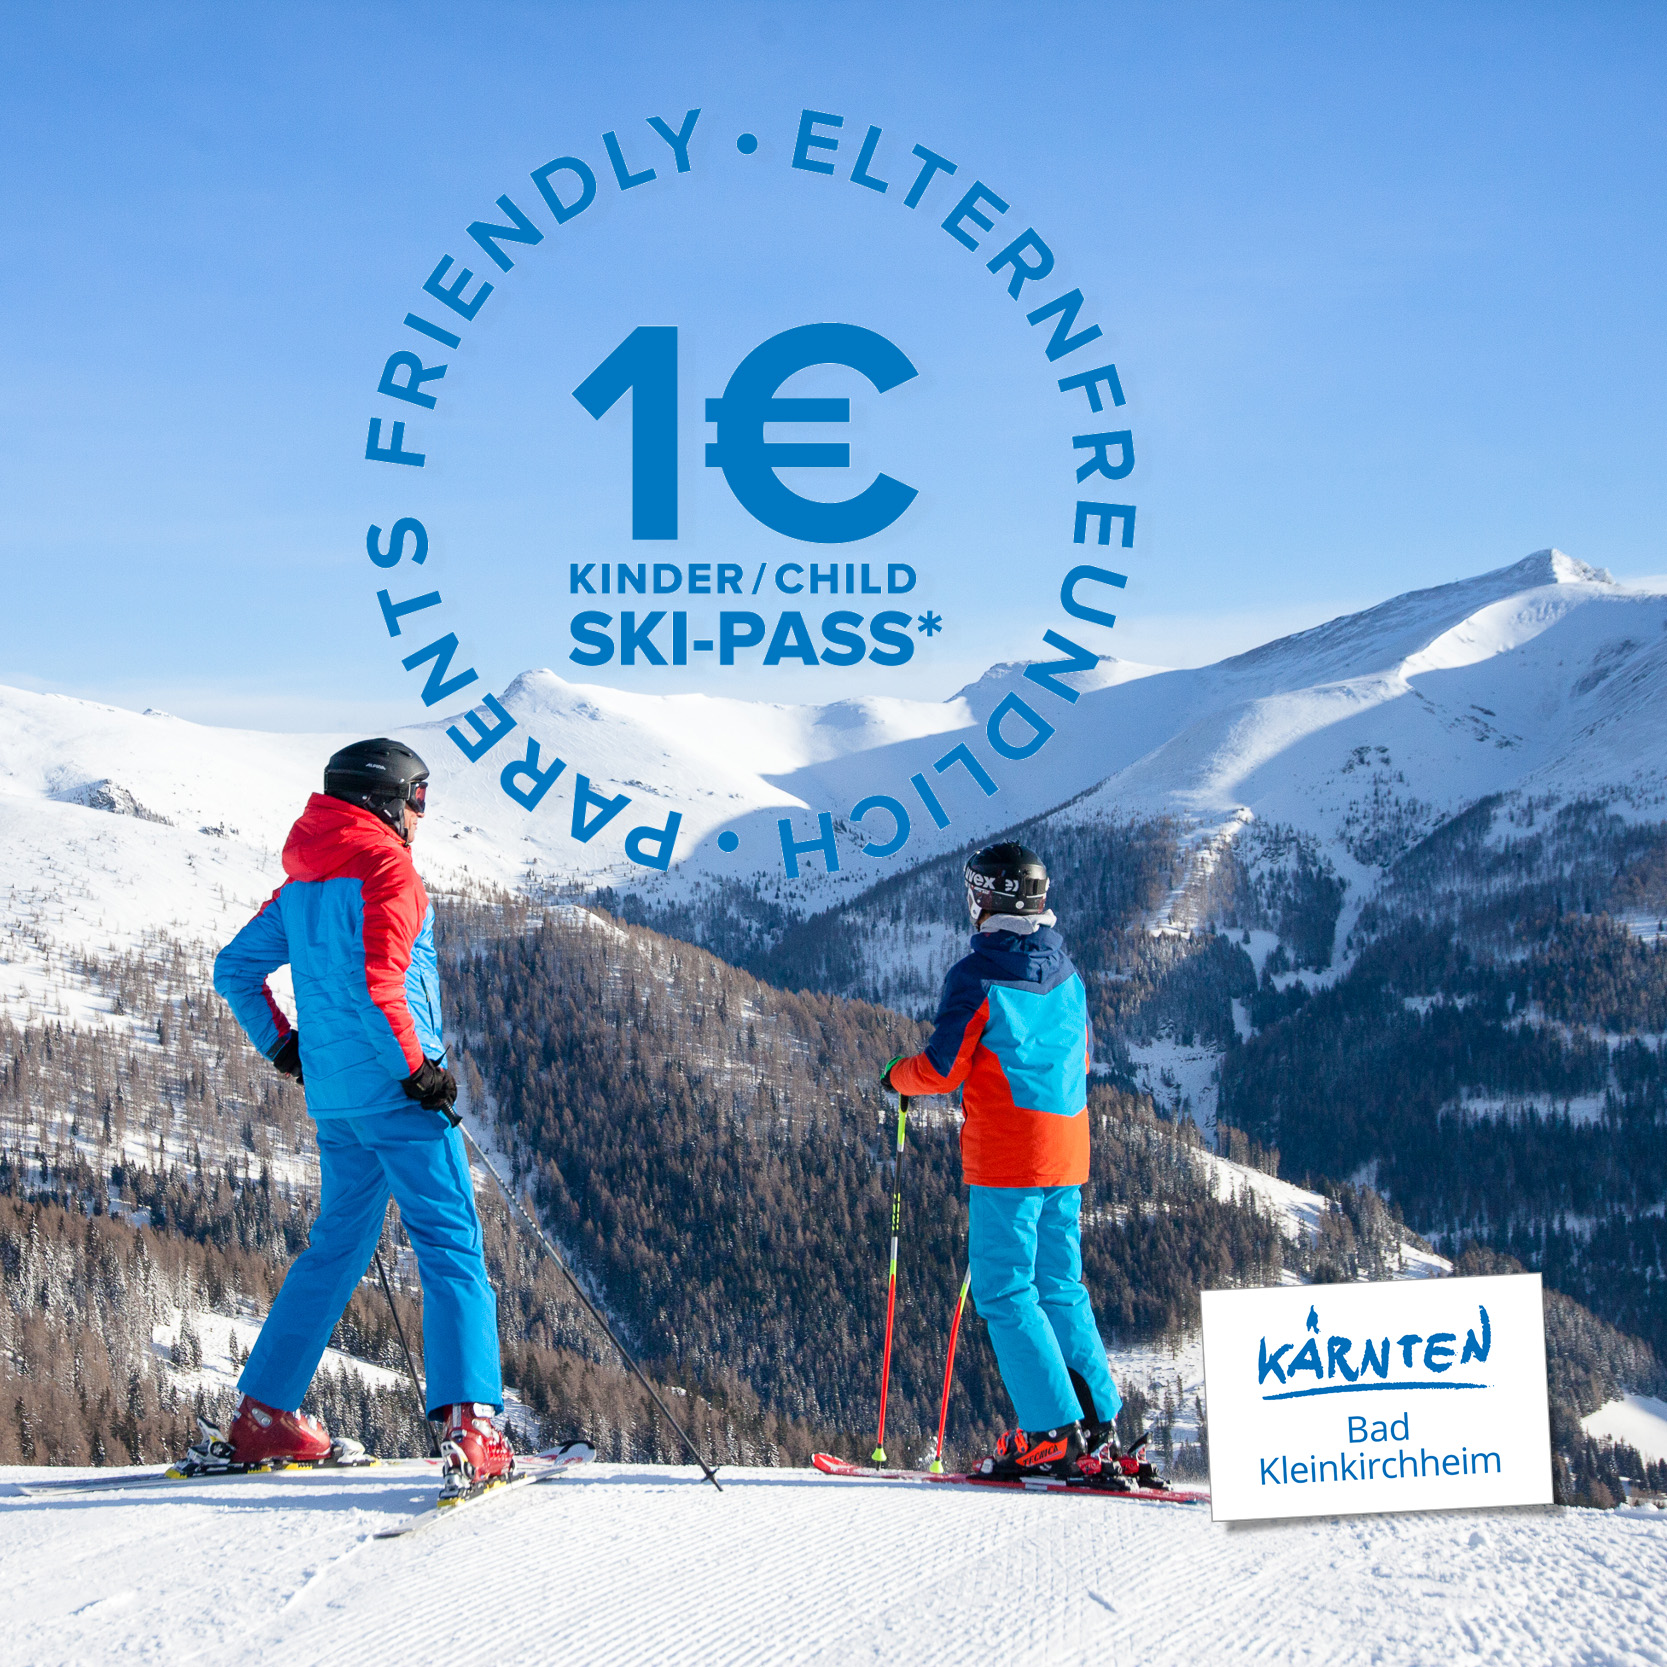 Parent-friendly savings: 1€ ski pass for children in the Bad Kleinkirchheim ski area. Winter vacation on the sunny side of the Alps